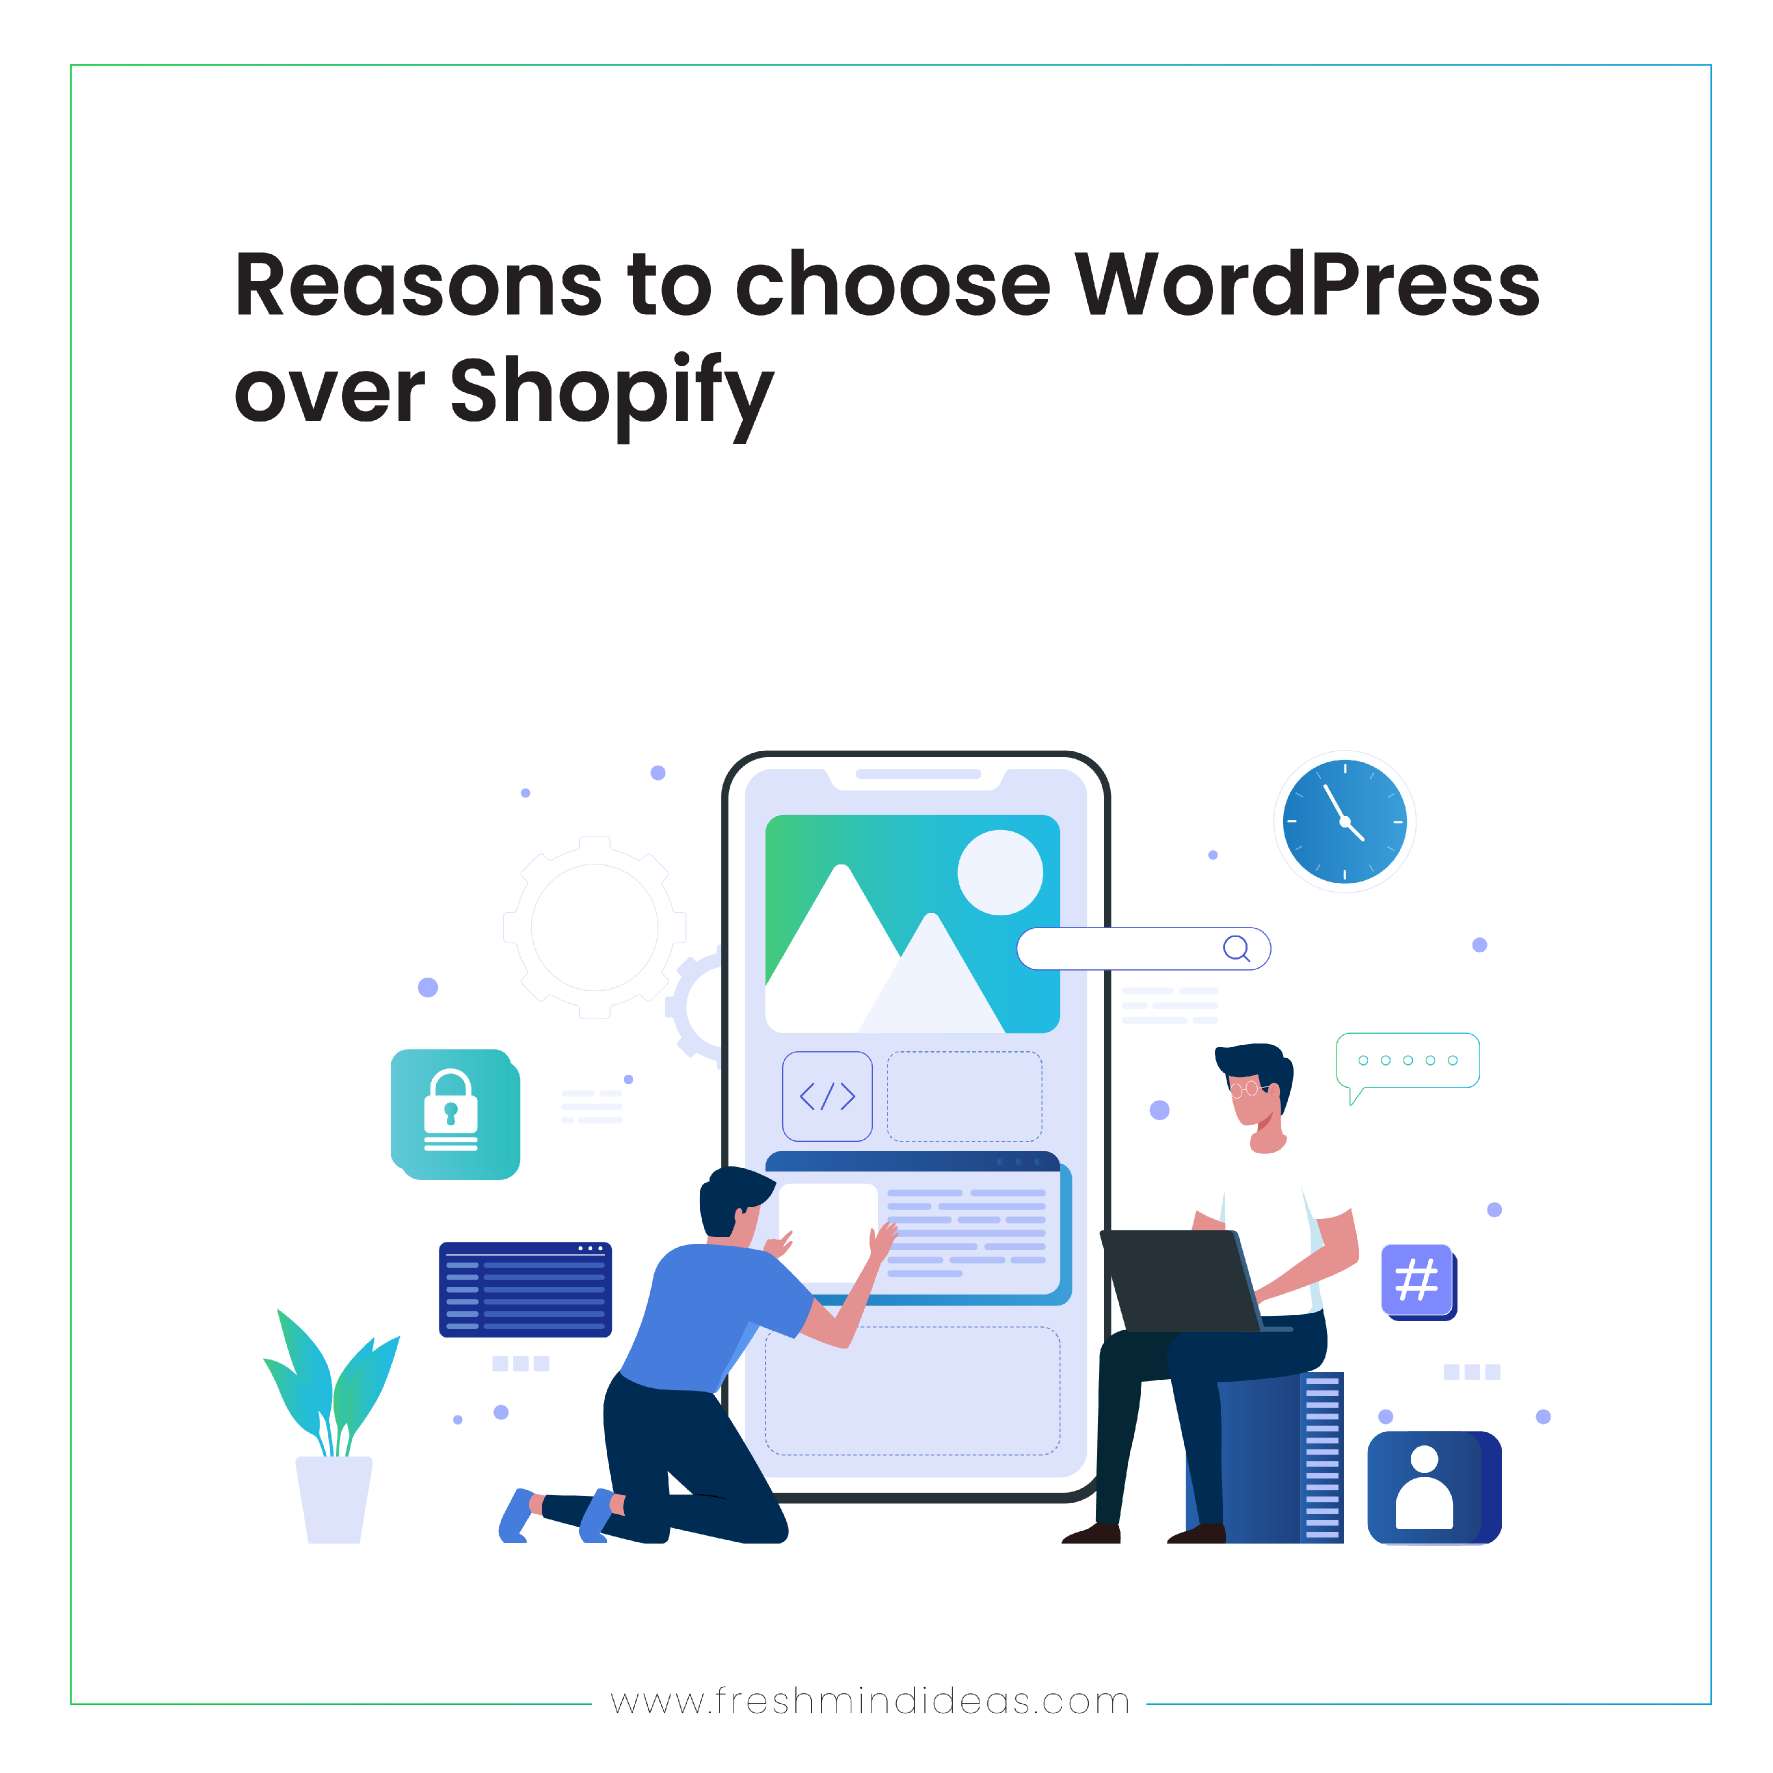 WordPress v/s Shopify - Which one should you choose for your business?